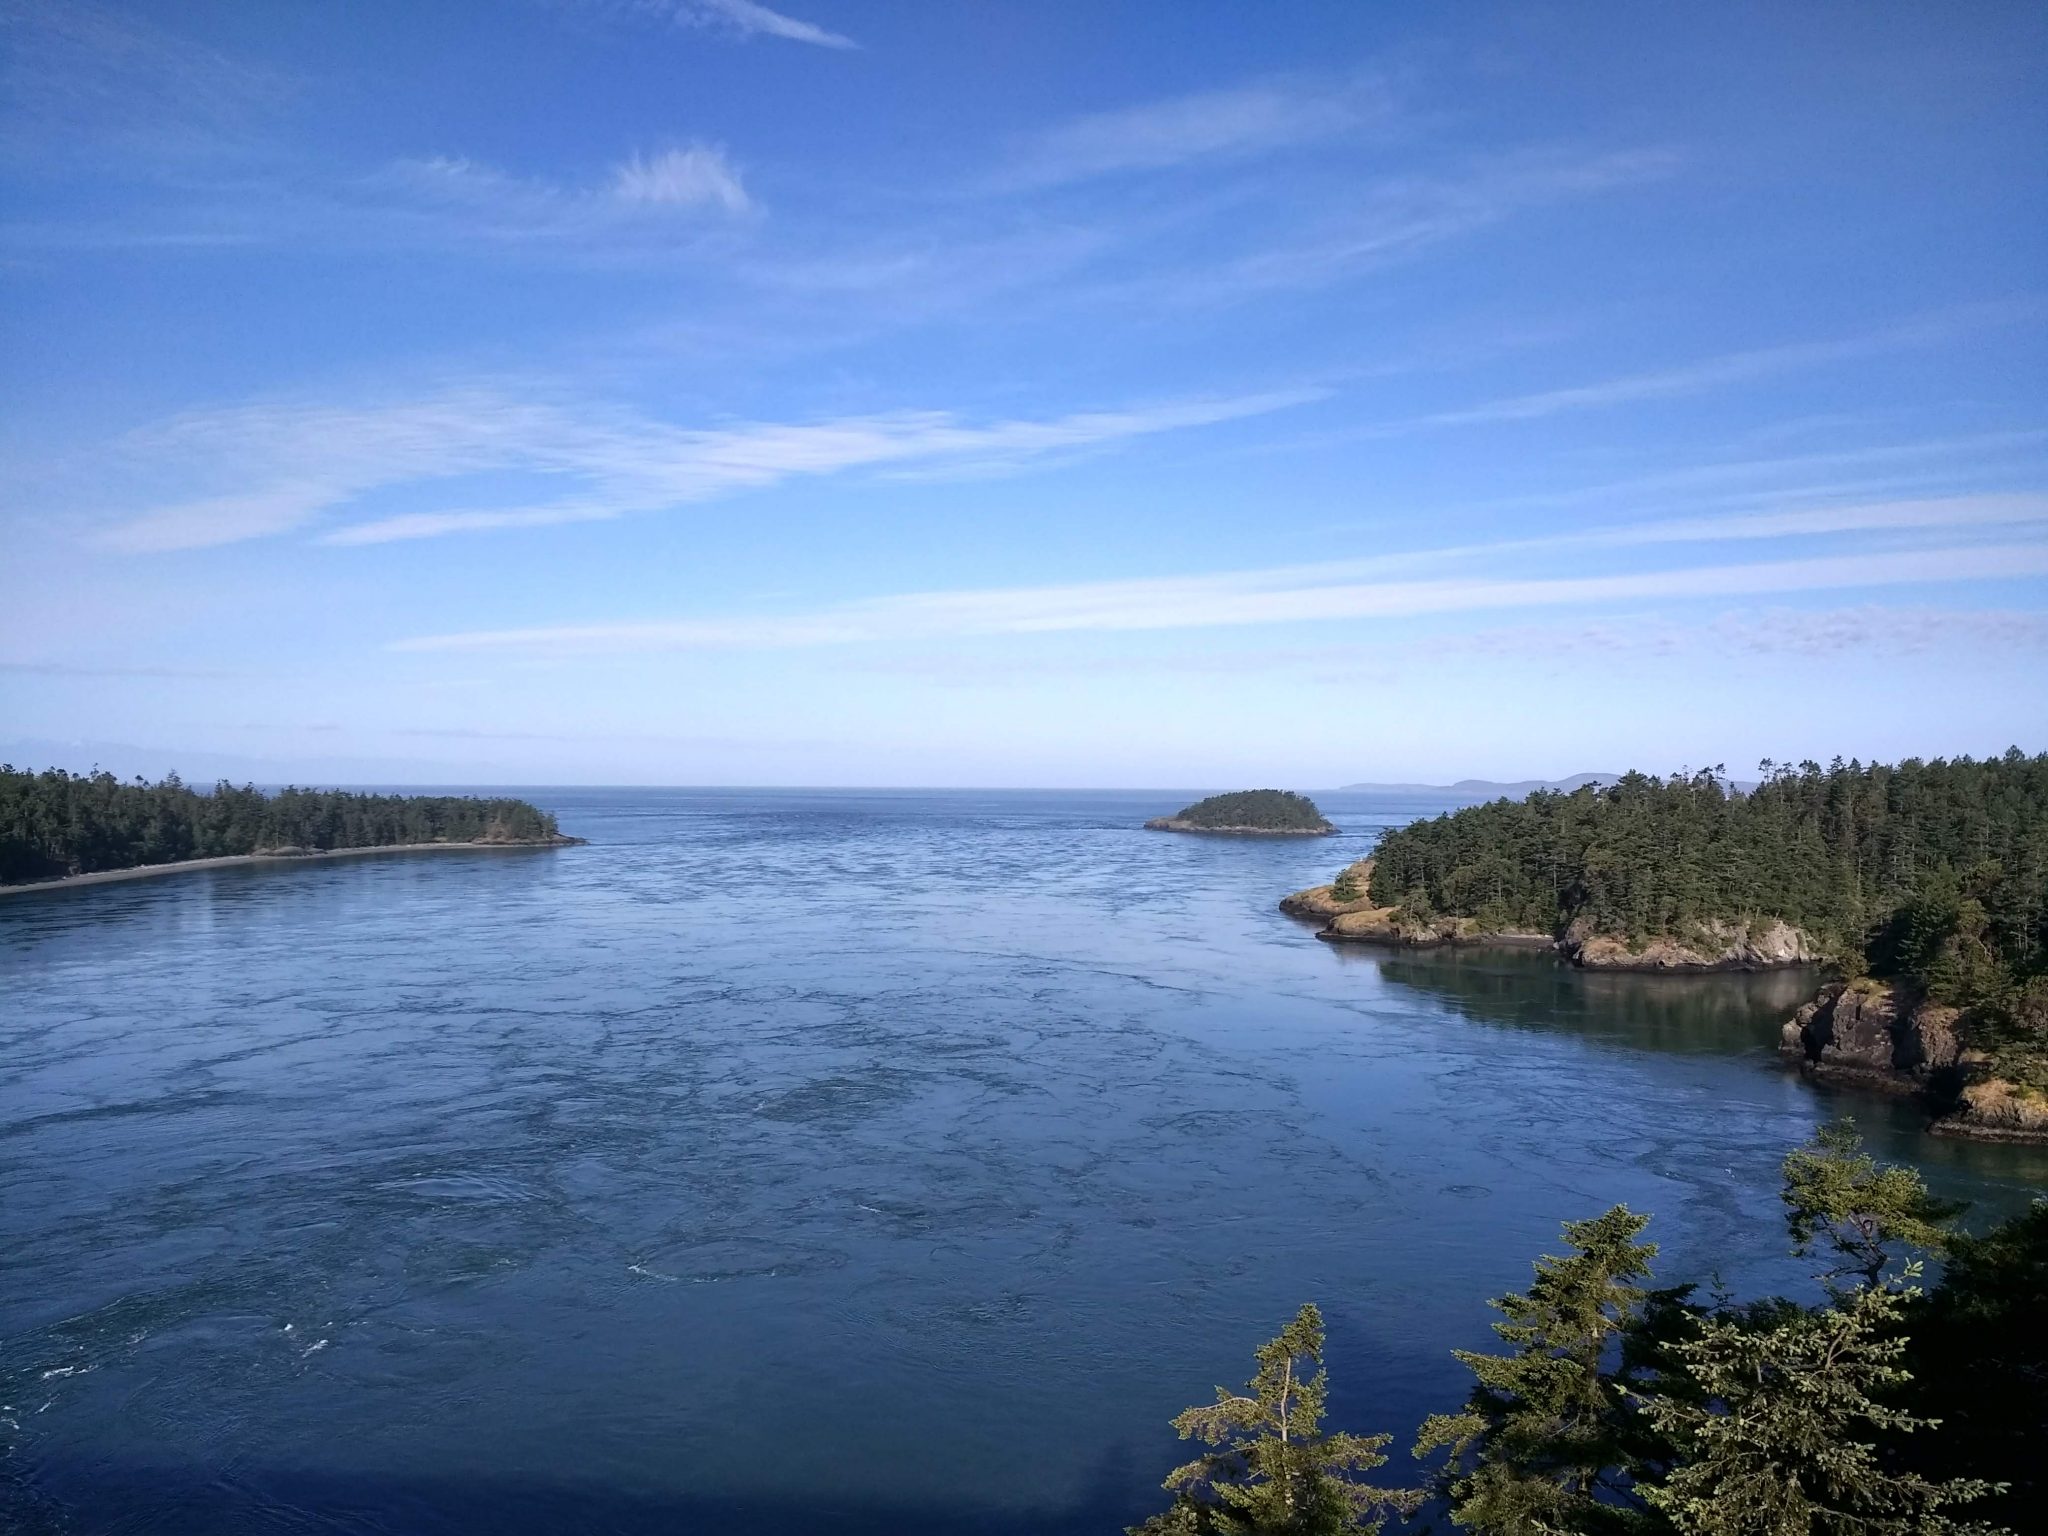 Several rocky island shores with forested hillsides are seen from above on a sunny day. The water has a current through Deception Pass and is bright blue. The sky is also blue with a few wispy clouds